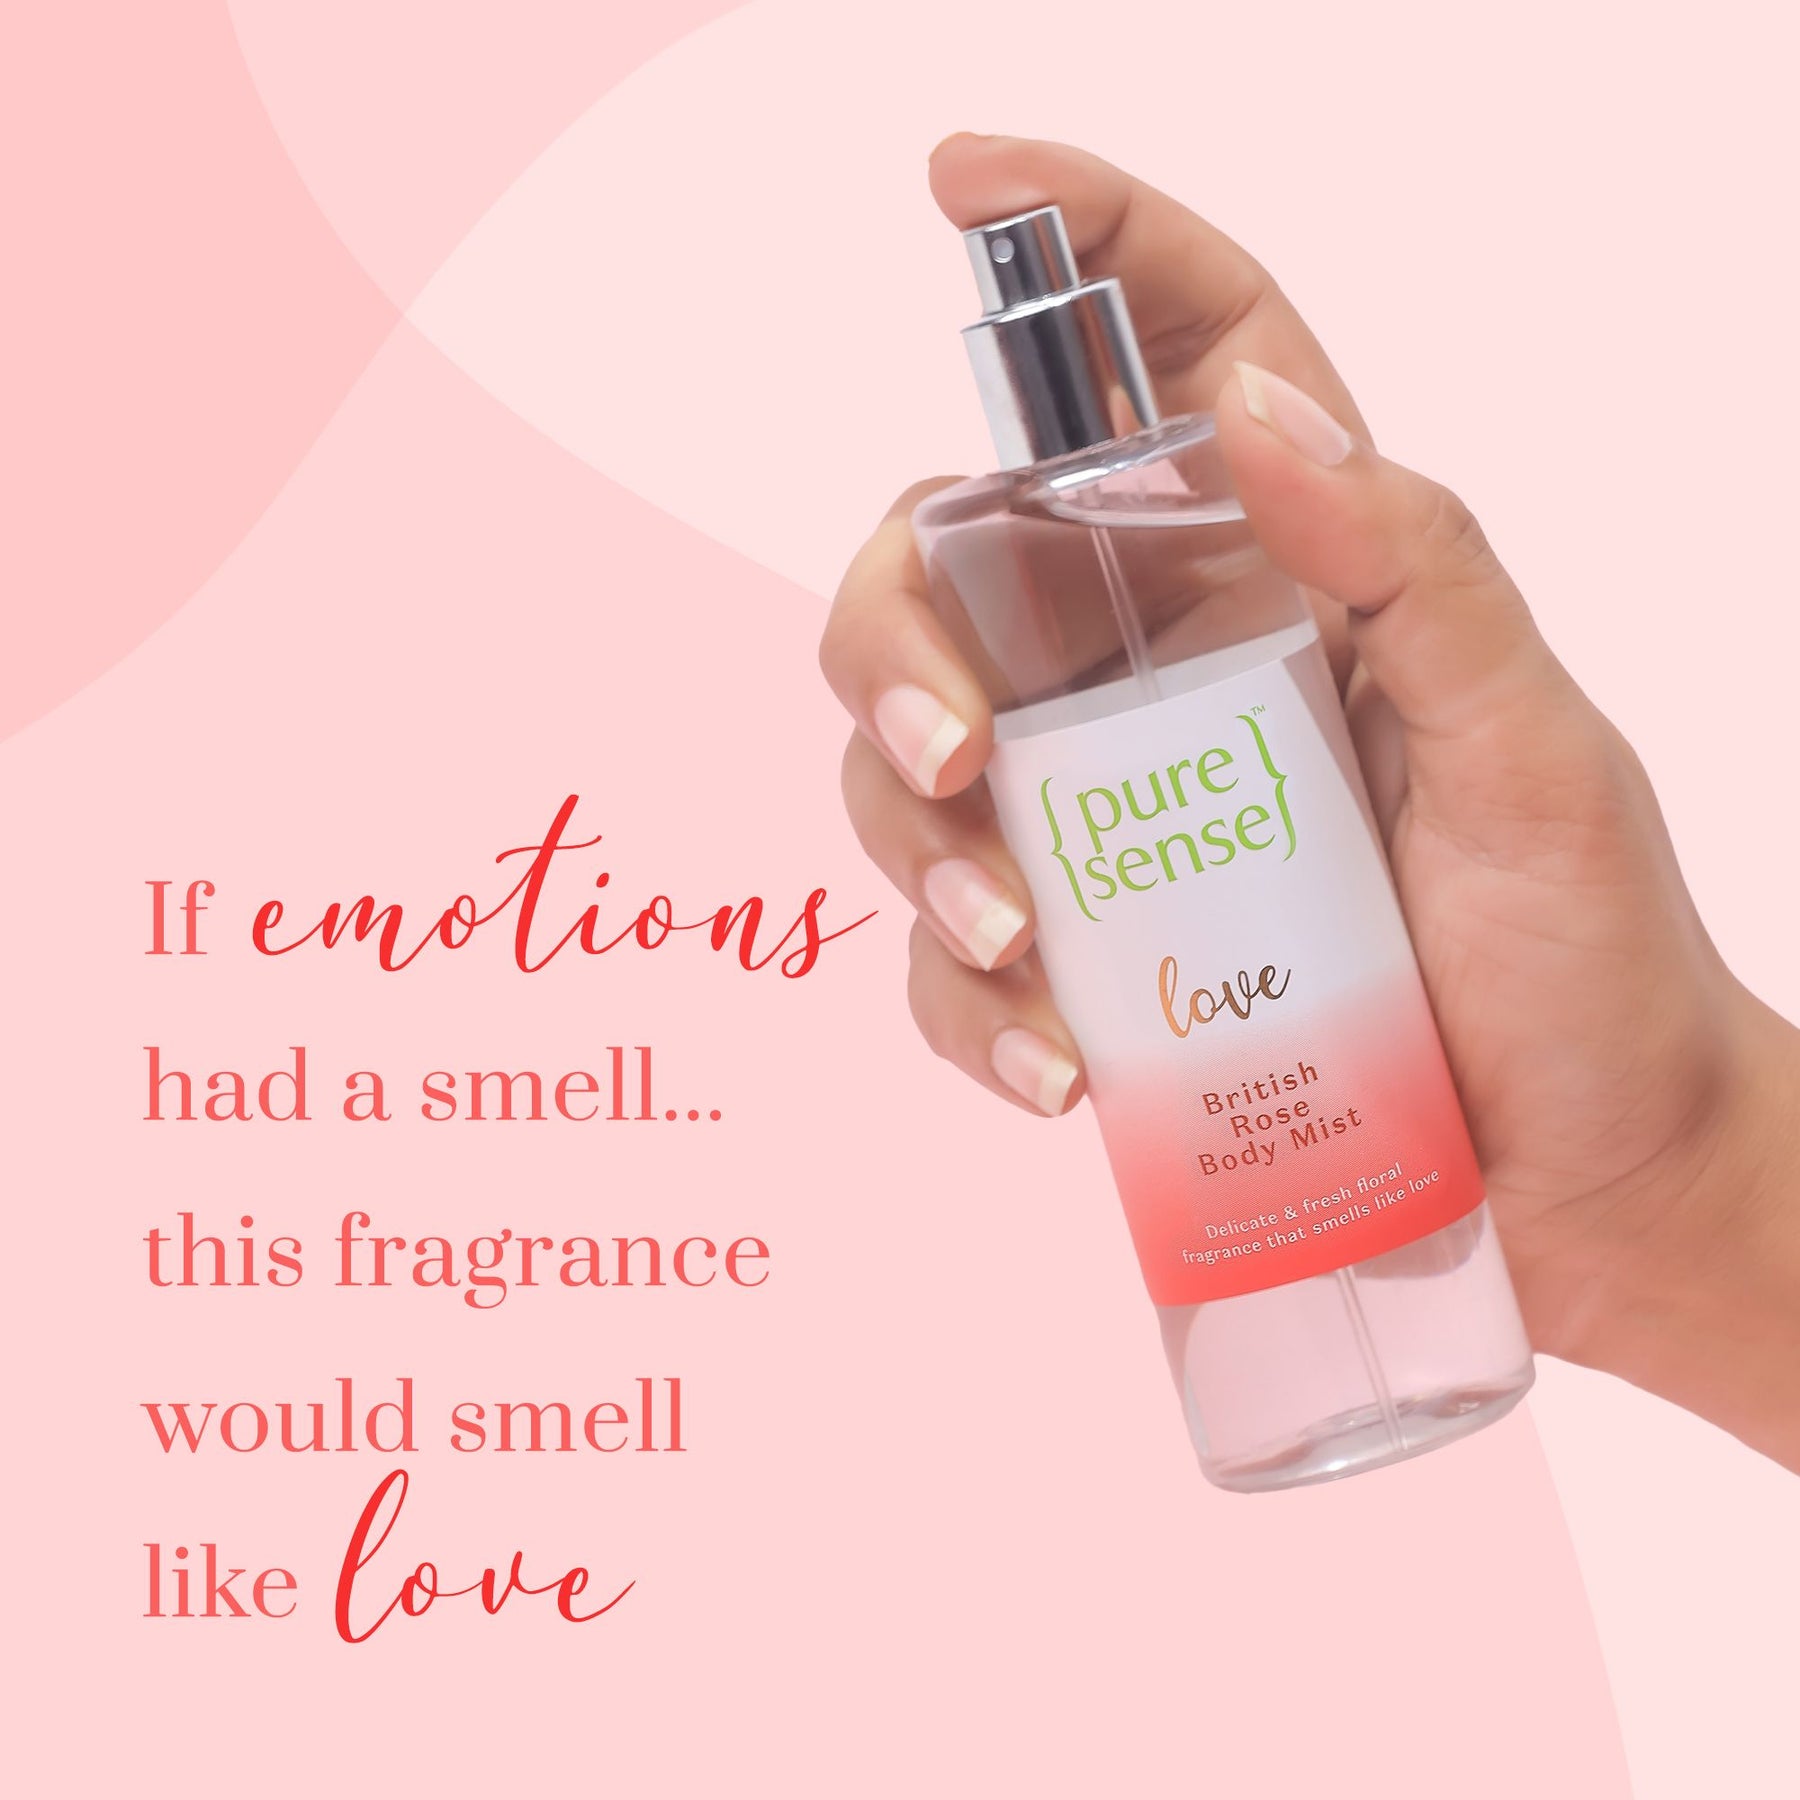 [CRED] Love British Rose Body Mist | From the makers of Parachute Advansed | 150ml - PureSense